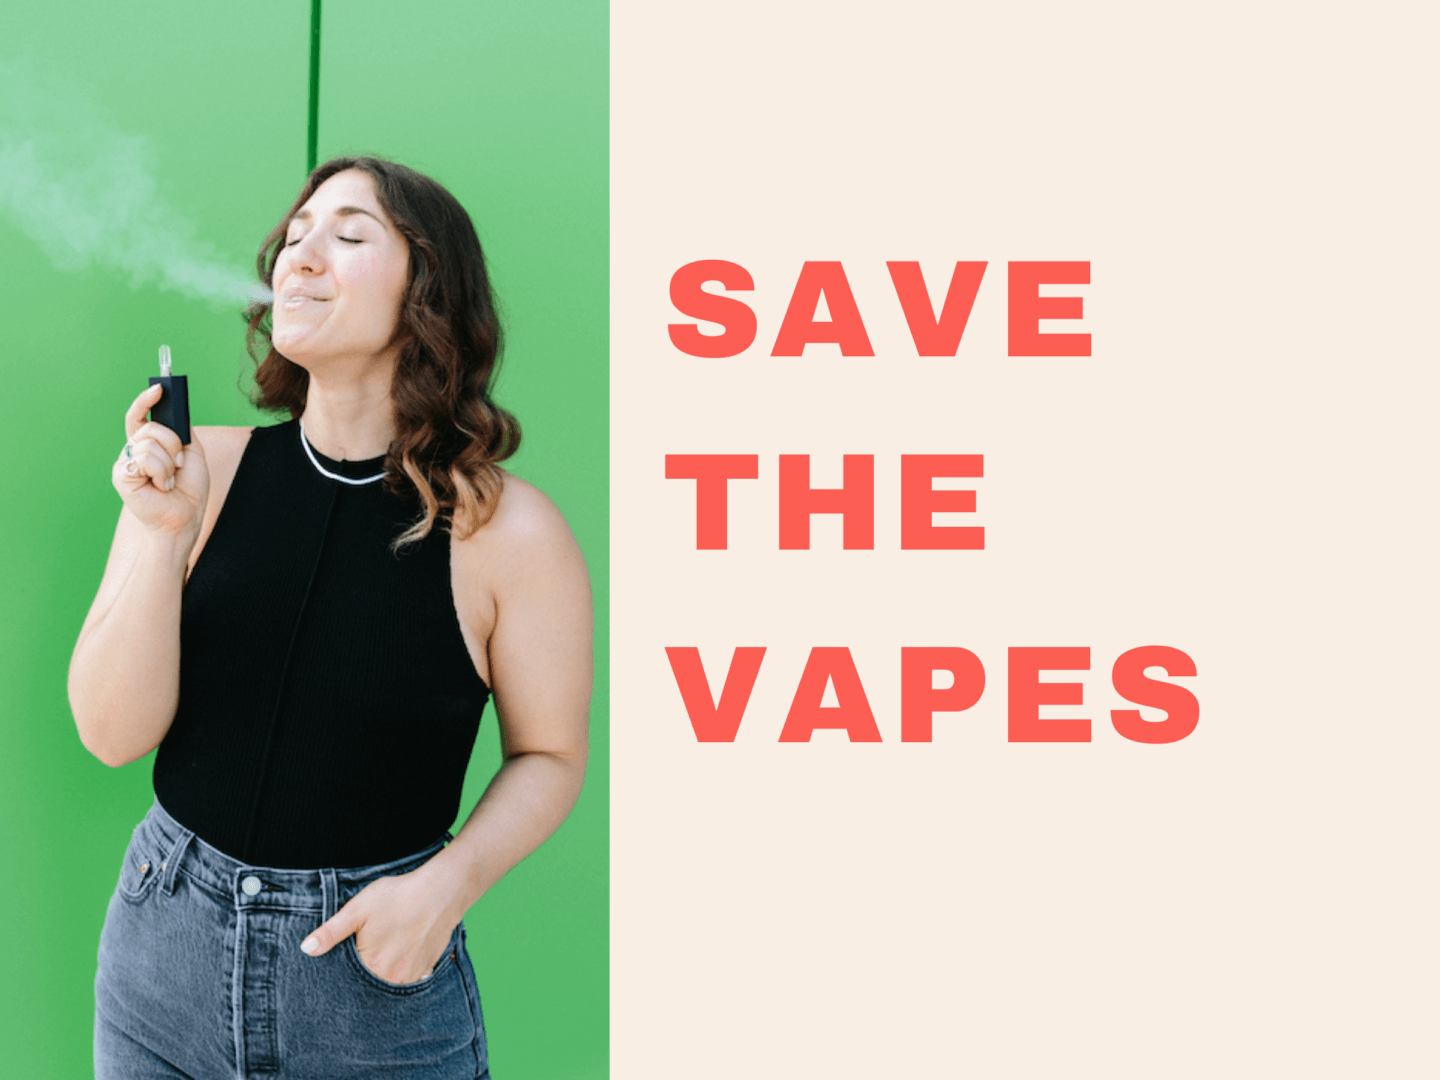 SAVE THE VAPES